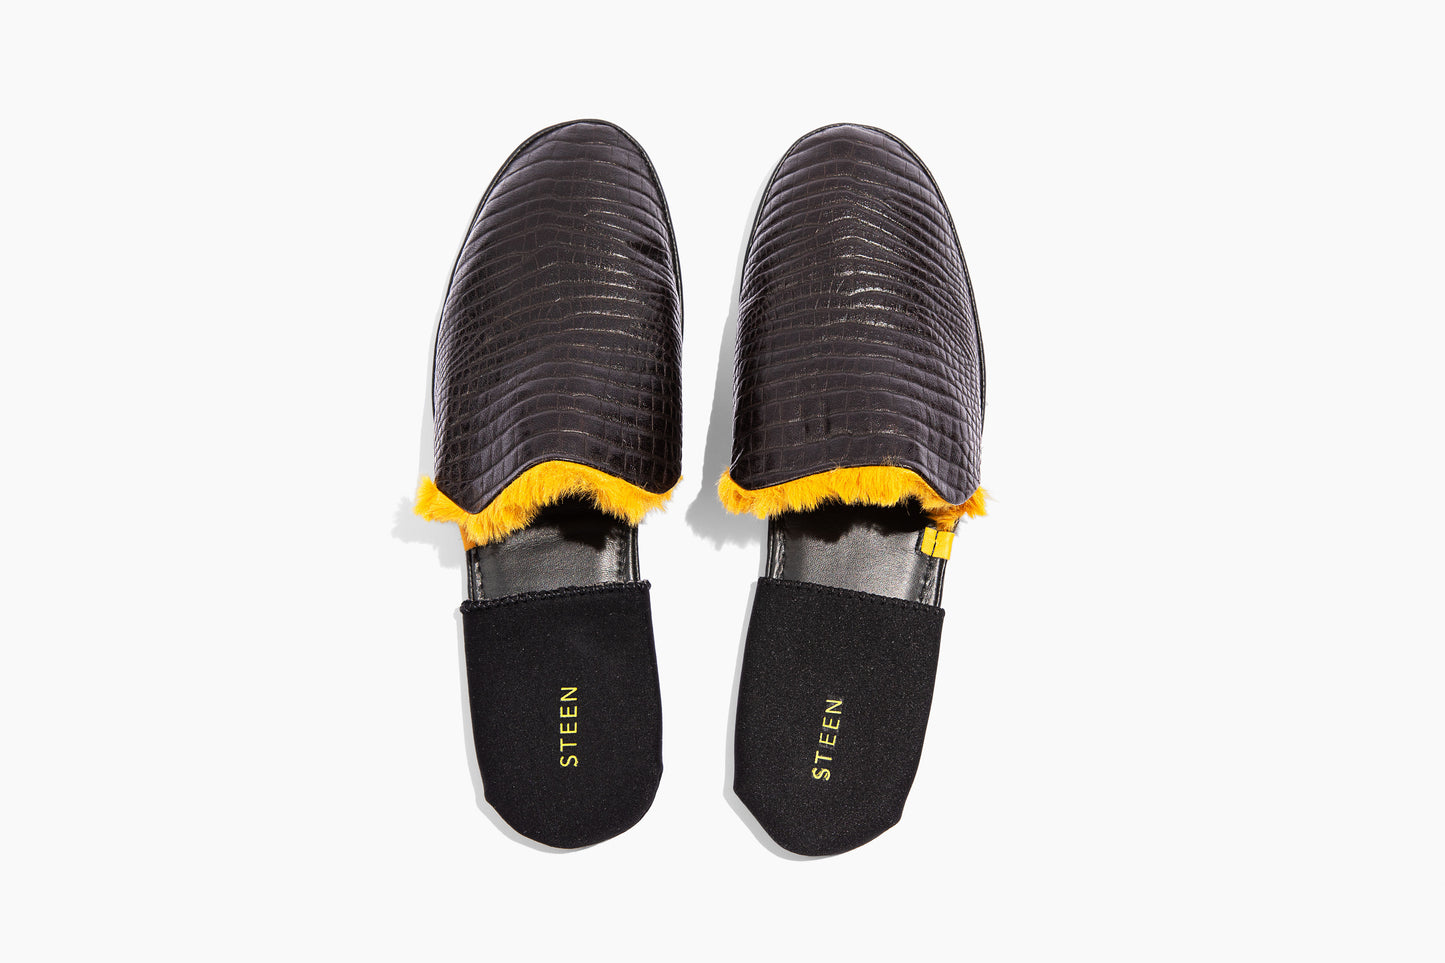 Luxury crocodile embossed leather. Yellow Eco-fur lining. Foldable travel slipper. Handmade in Italy.